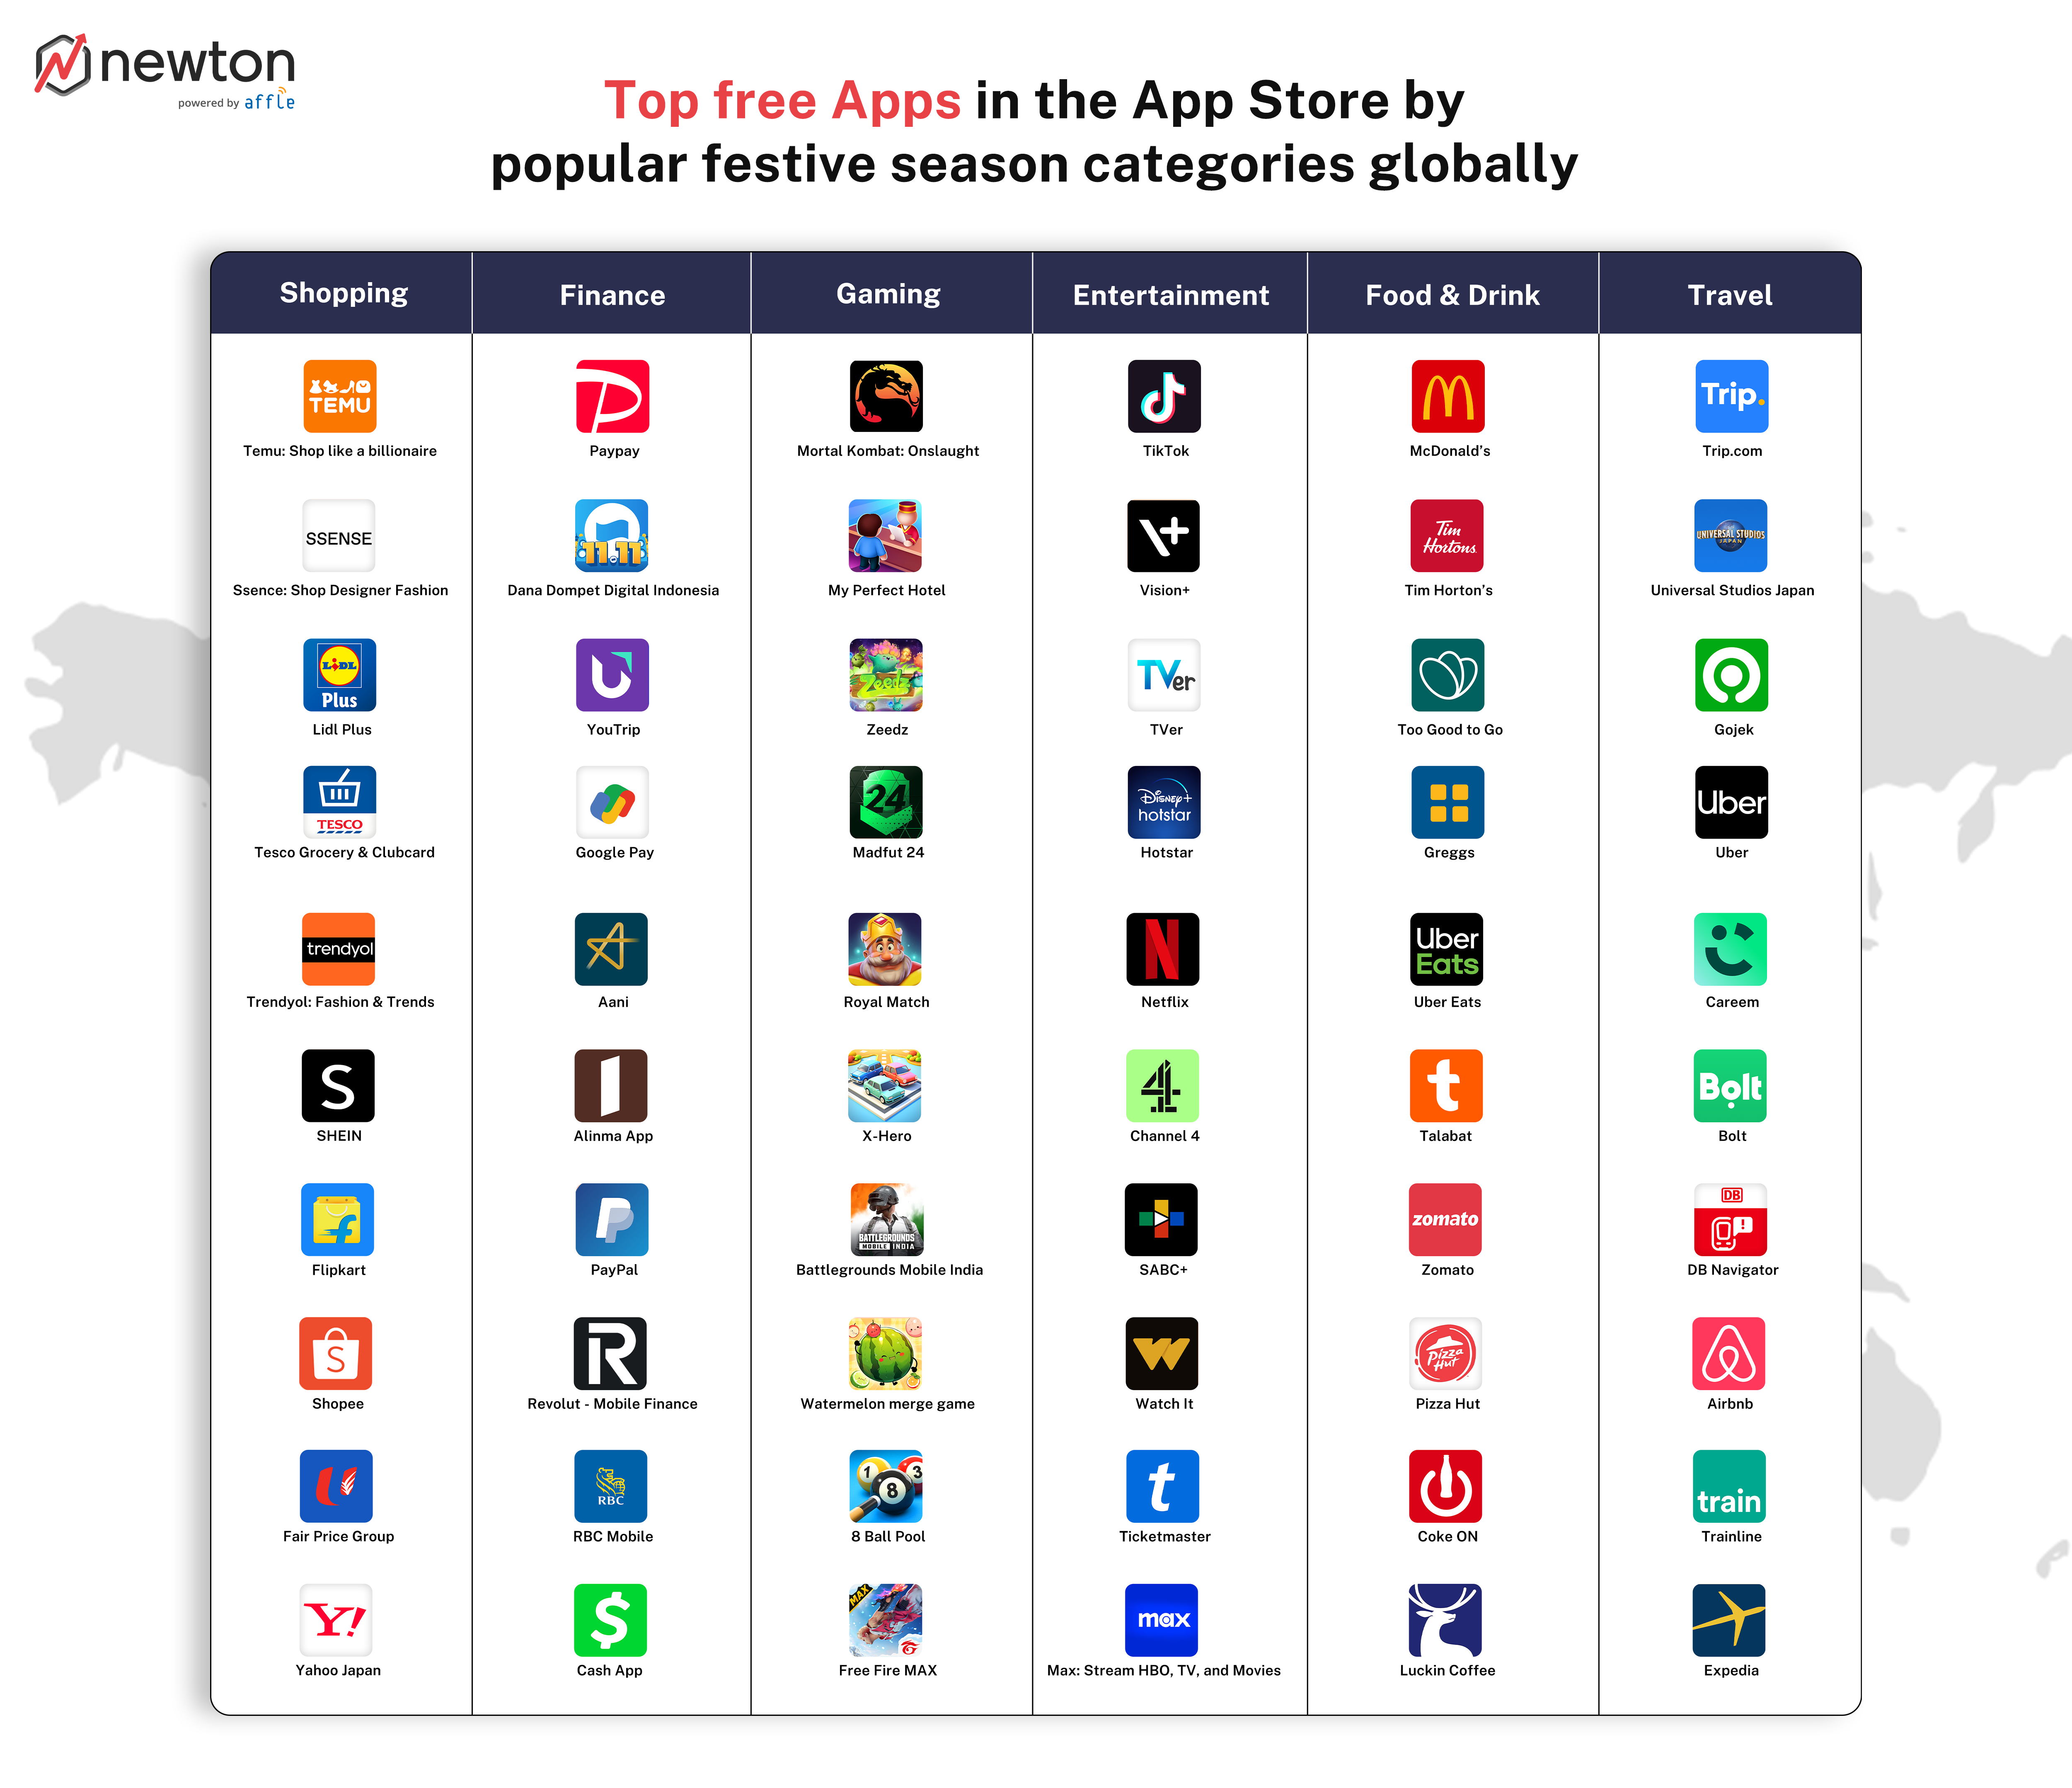 Apple-search-ads-festive-season-user-acquisition-top-apps-by-category